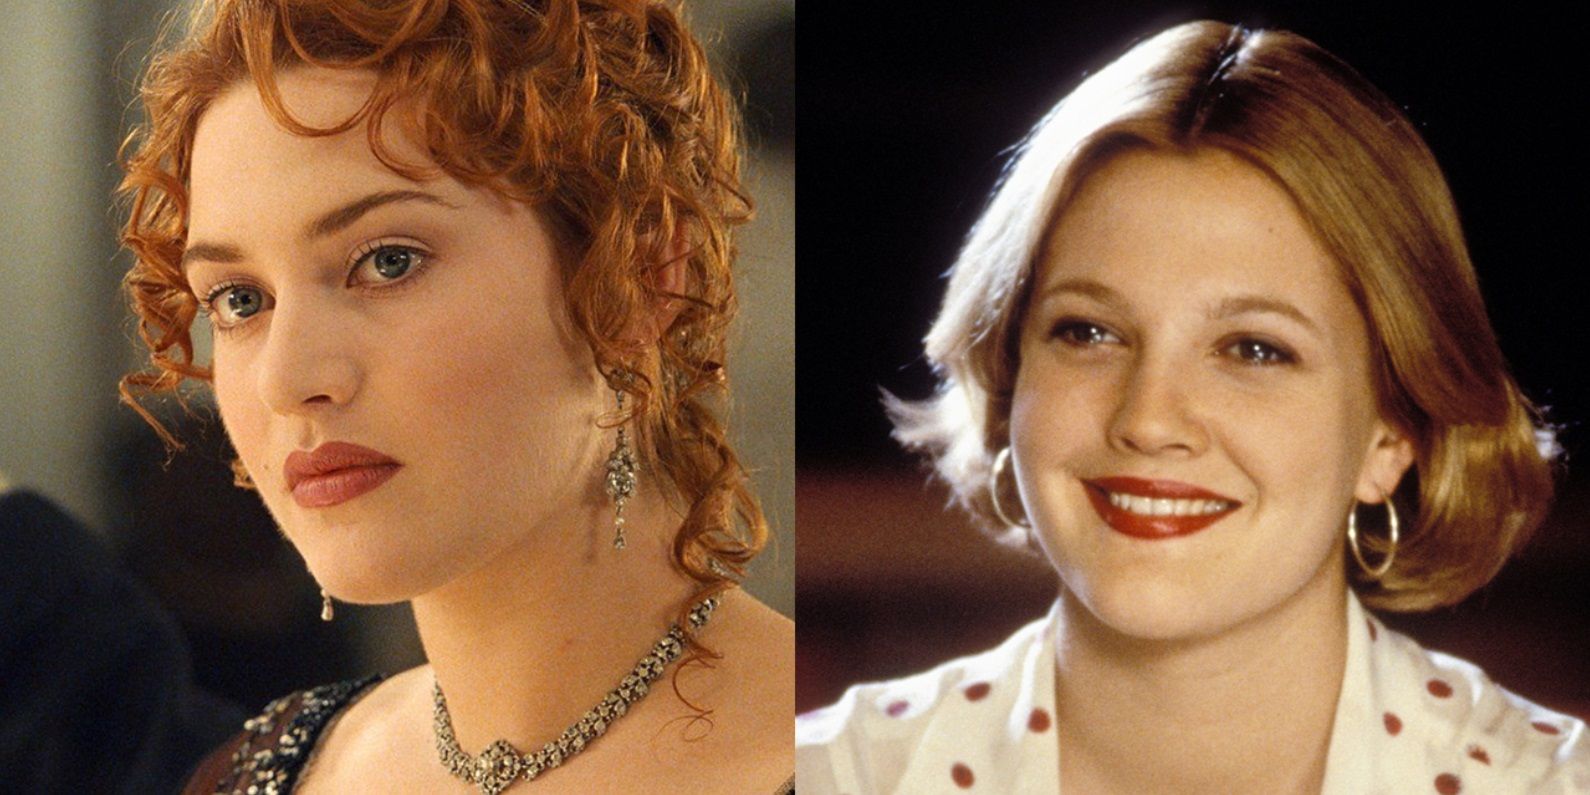 Split image of Kate Winslet in Titanic and Drew Barrymore in The Wedding Singer